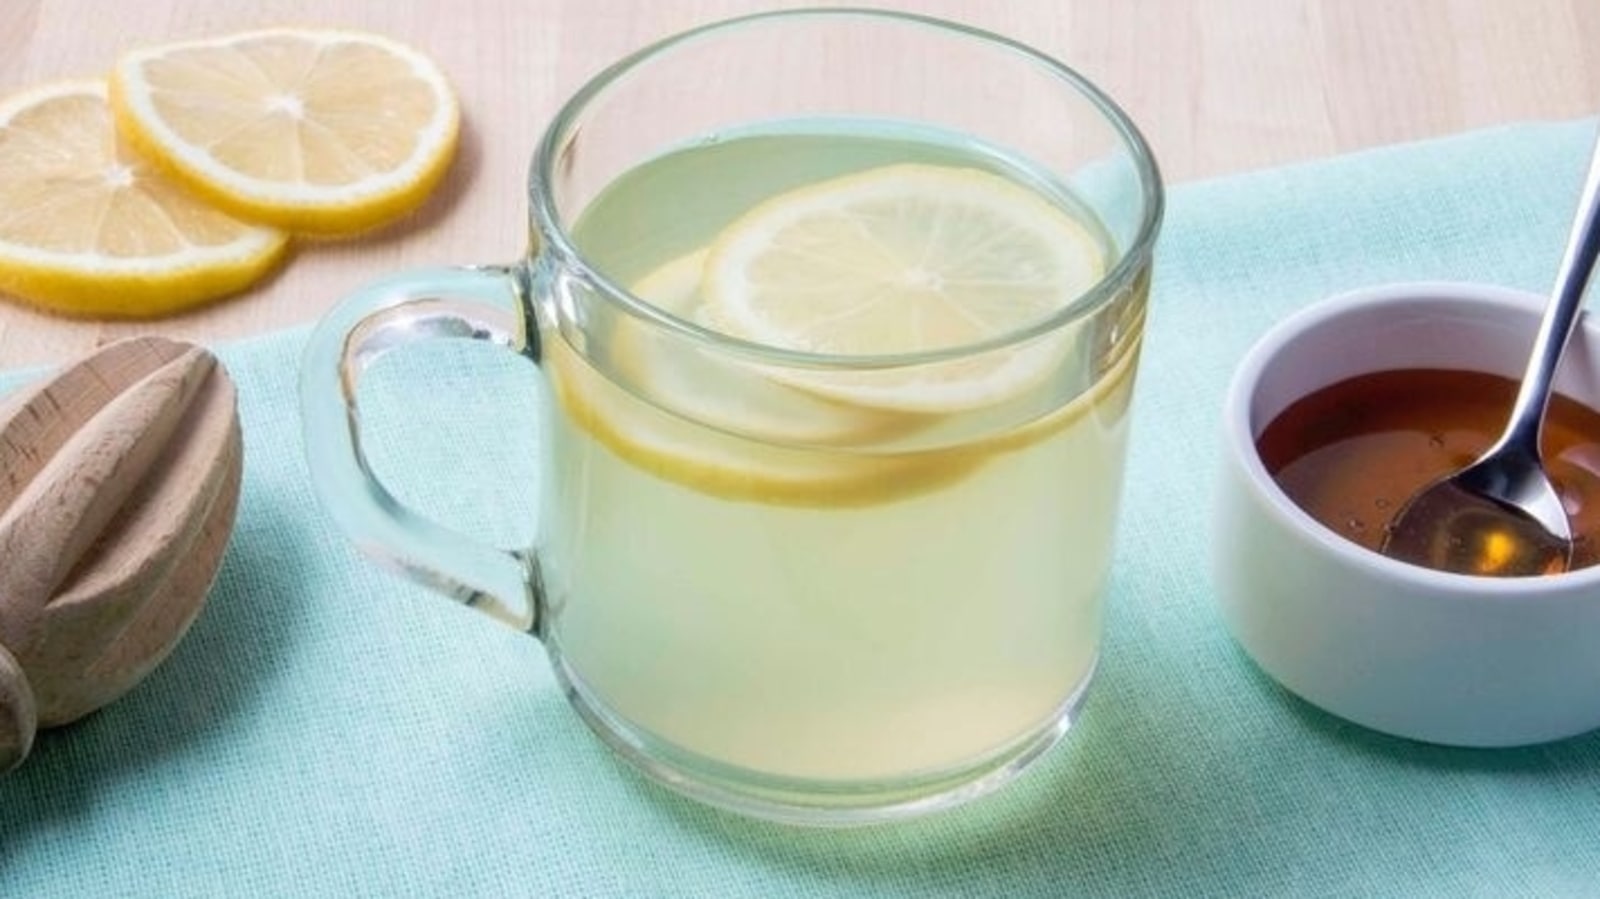 ayurveda-expert-on-rules-to-have-lemon-and-honey-water-to-lose-weight-dos-and-don-ts